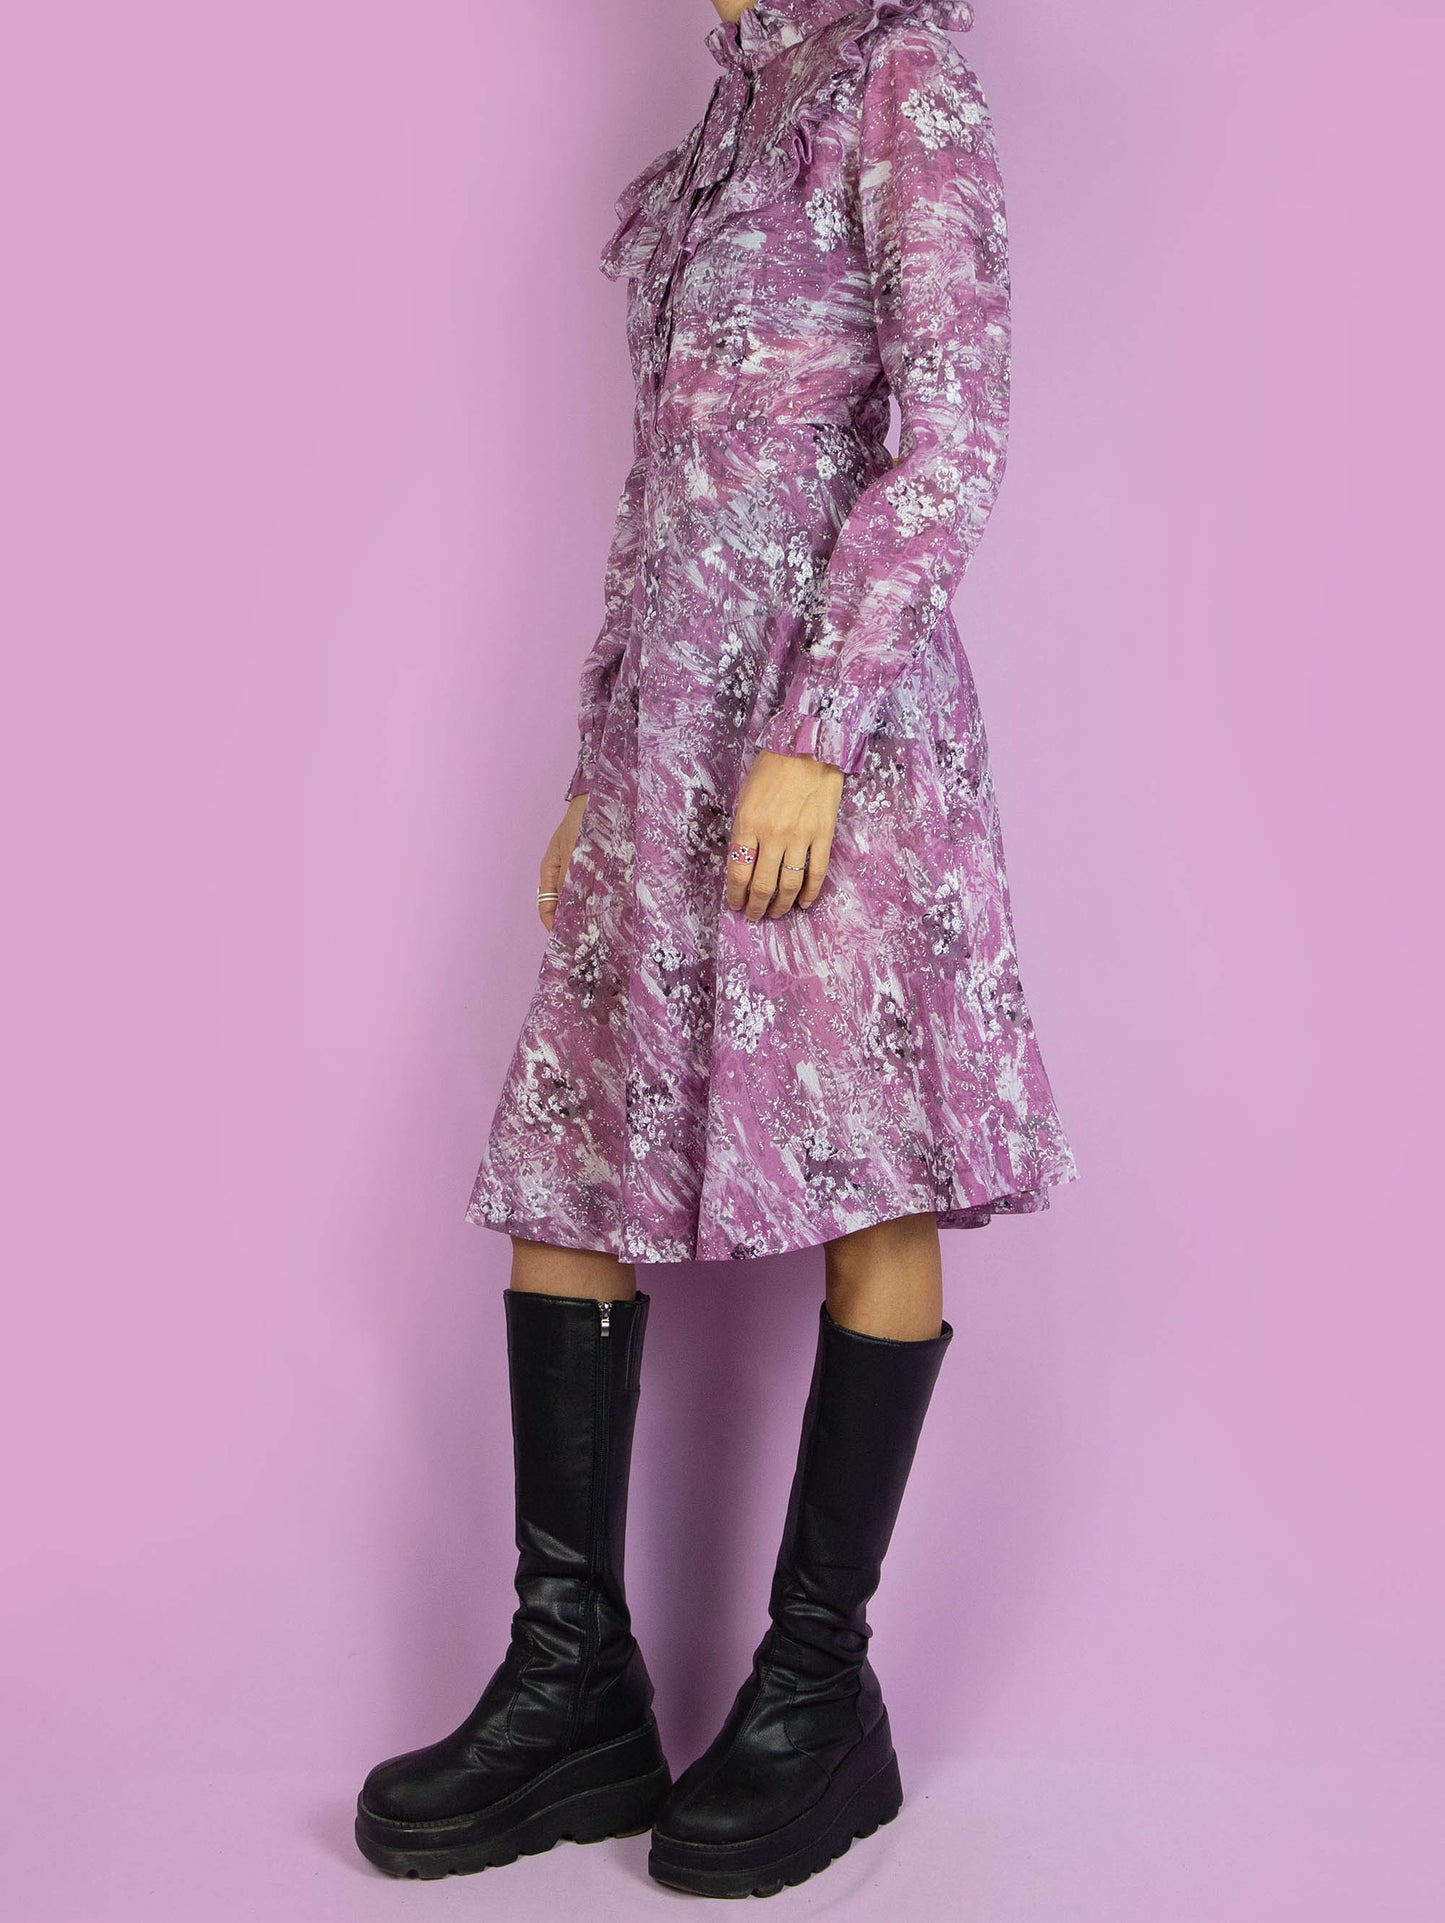 The Vintage 90s Purple Ruffle Collar Dress is a semi-sheer abstract purple dress with long sleeves, buttons, ruffles, and a bow at the collar. Boho retro 1990s romantic midi dress.